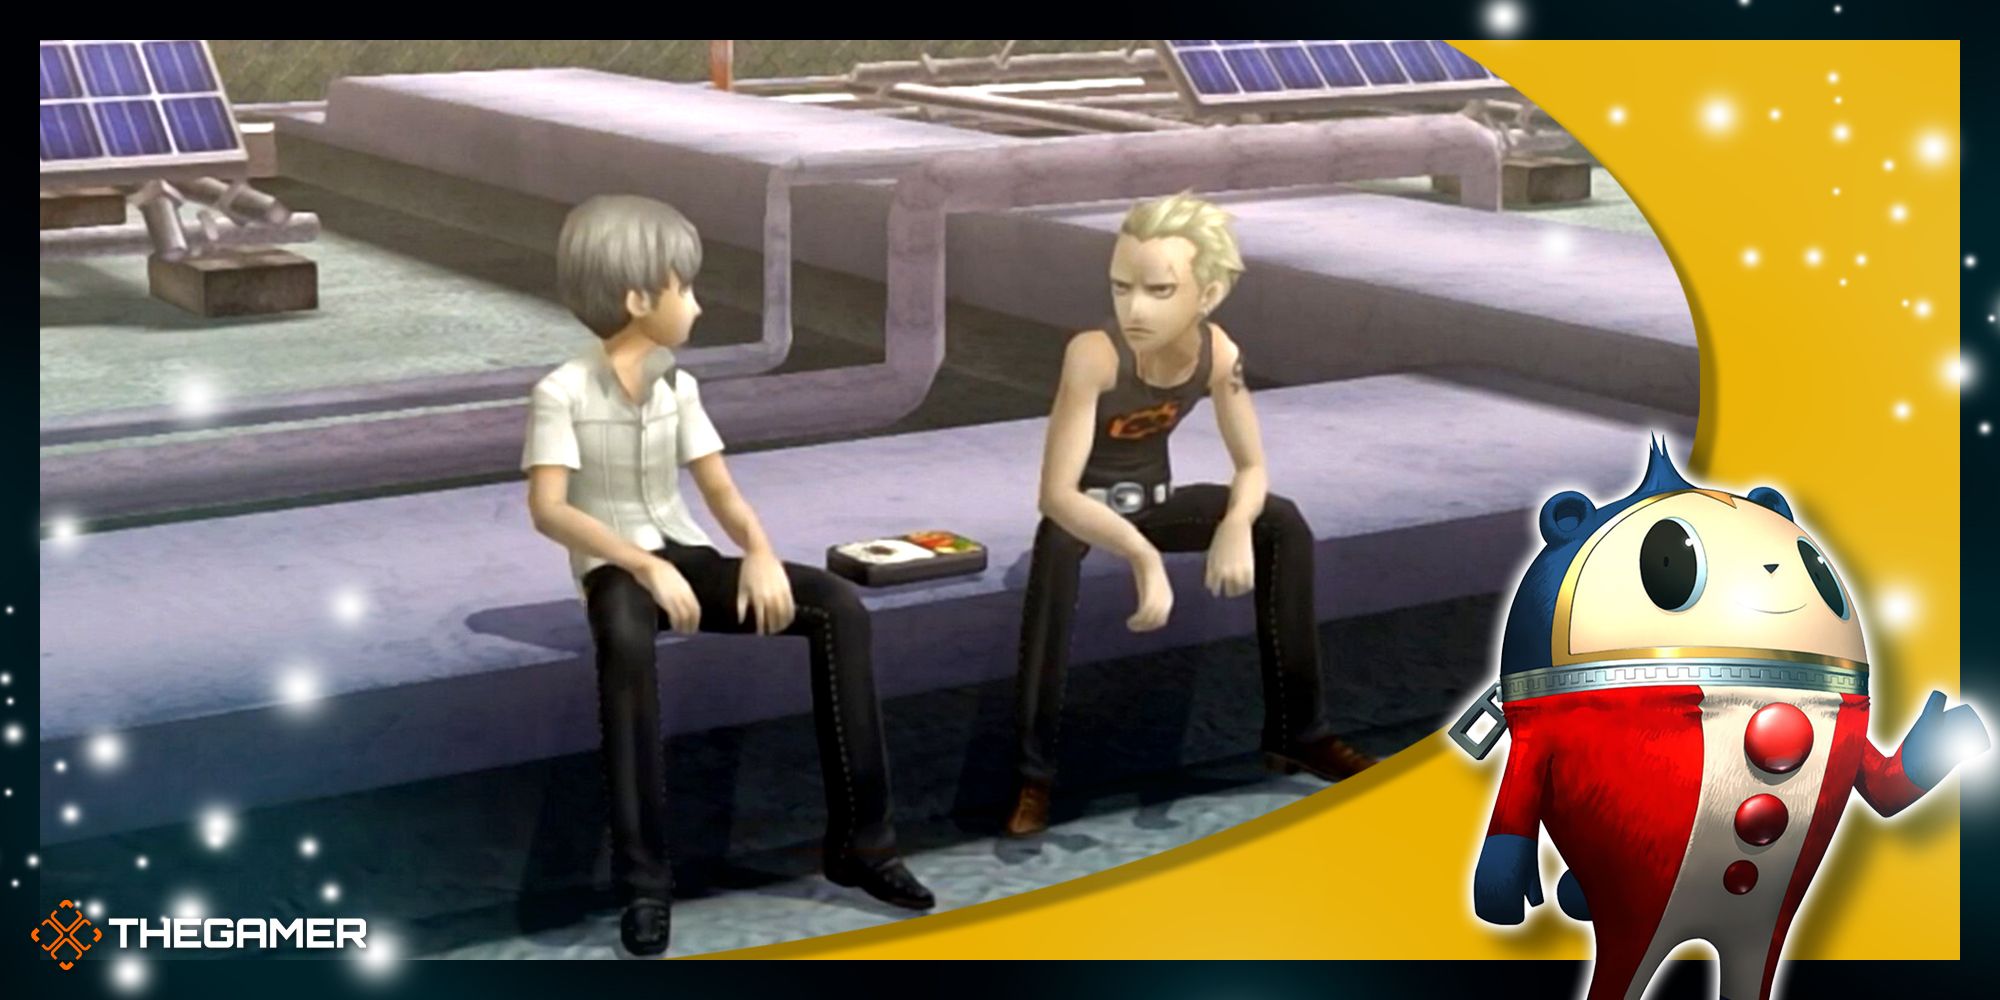 Persona 4 Golden - Yu and Kanji sharing a boxed lunch with a Teddie overlay in the corner.